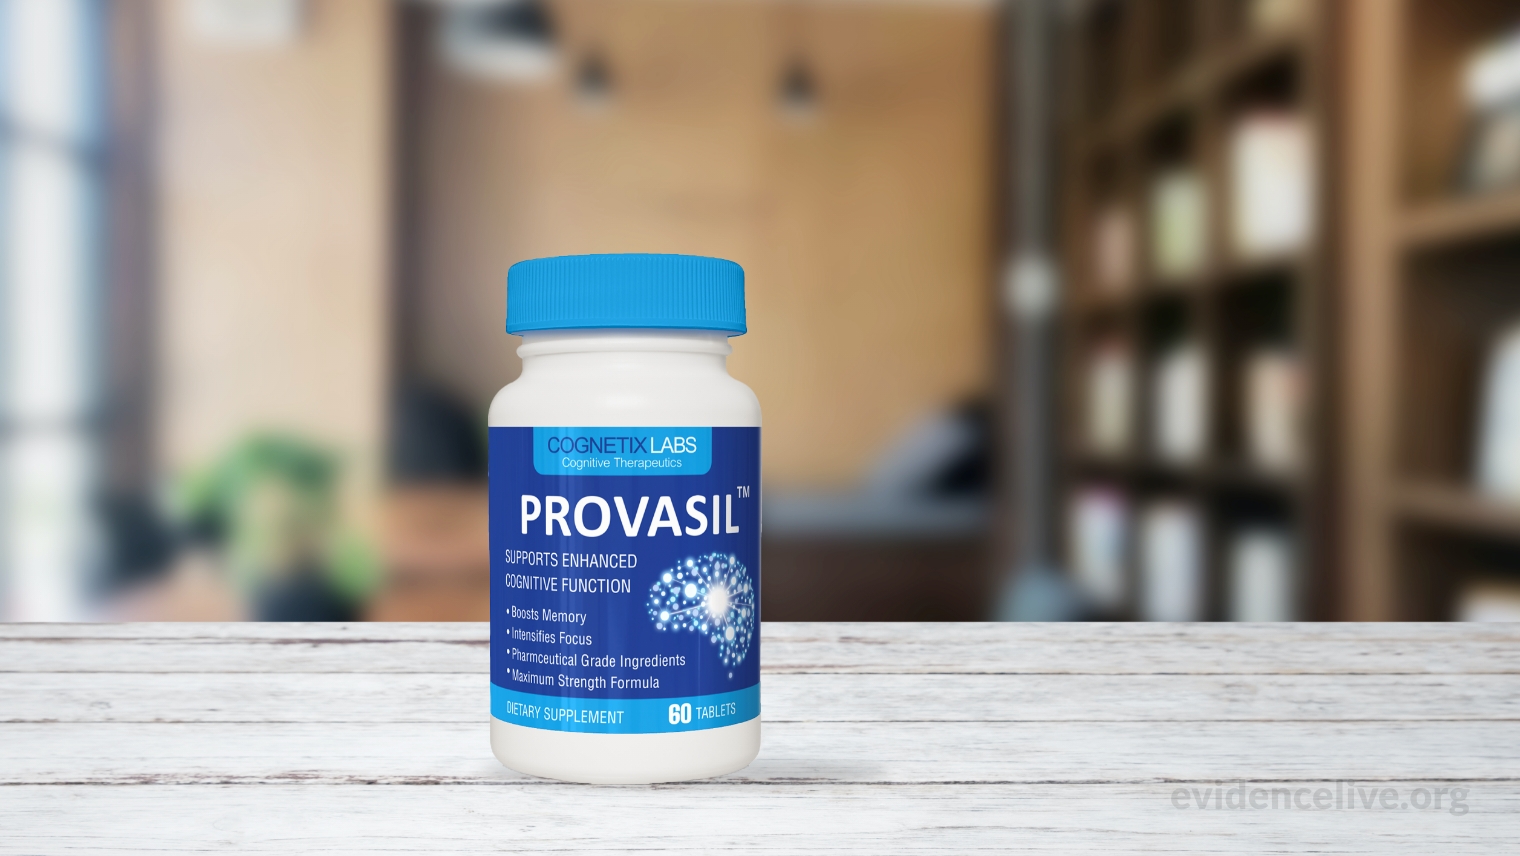 Provasil benefits and effects